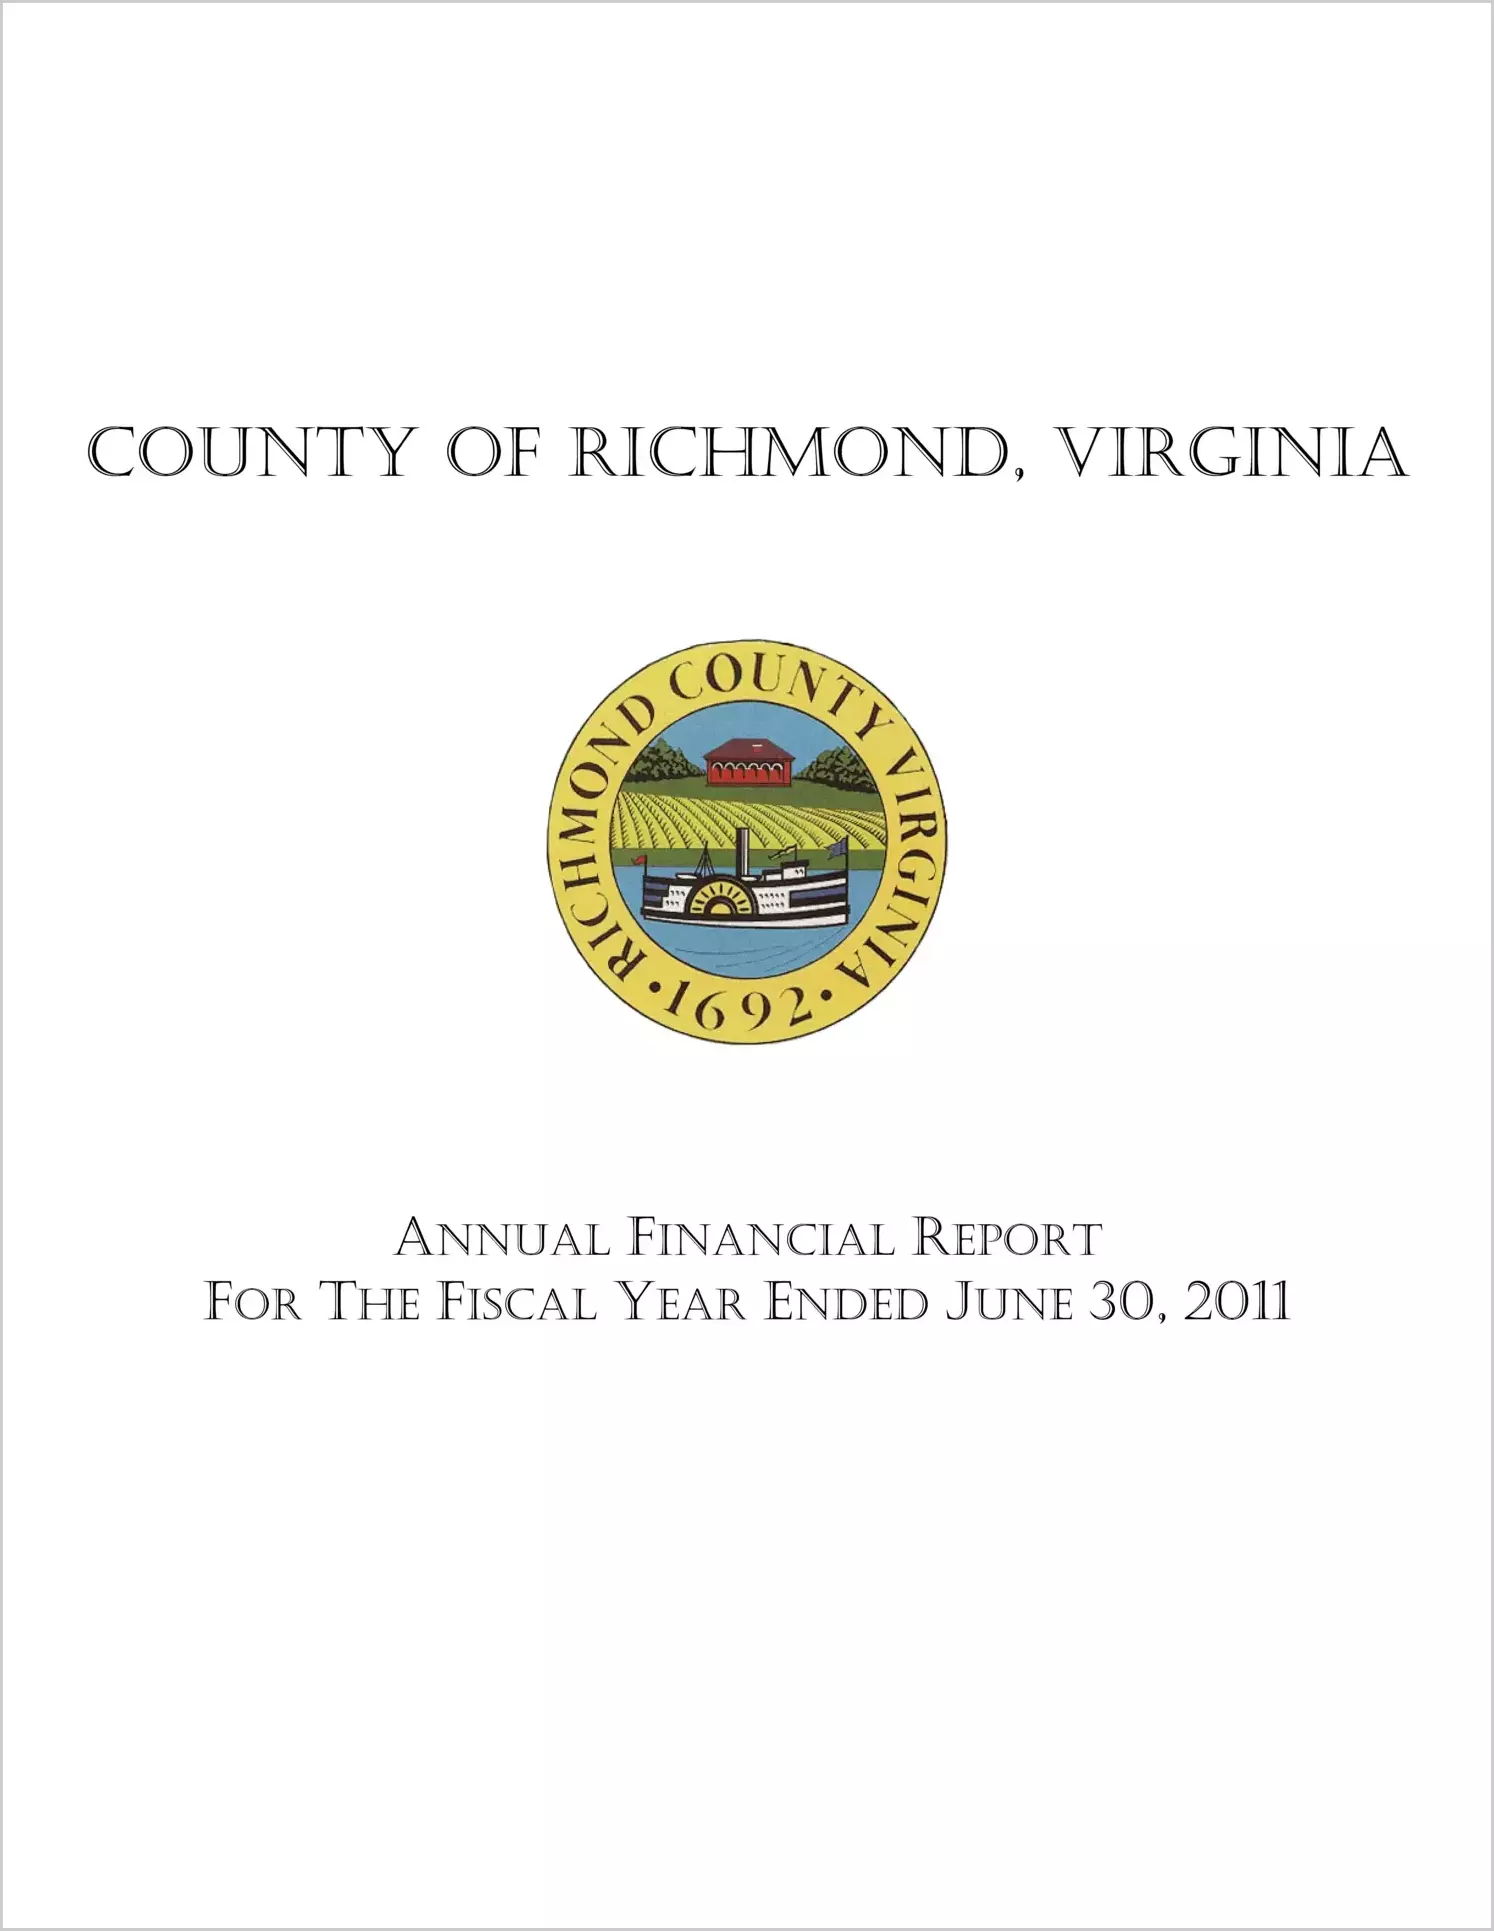 2011 Annual Financial Report for County of Richmond